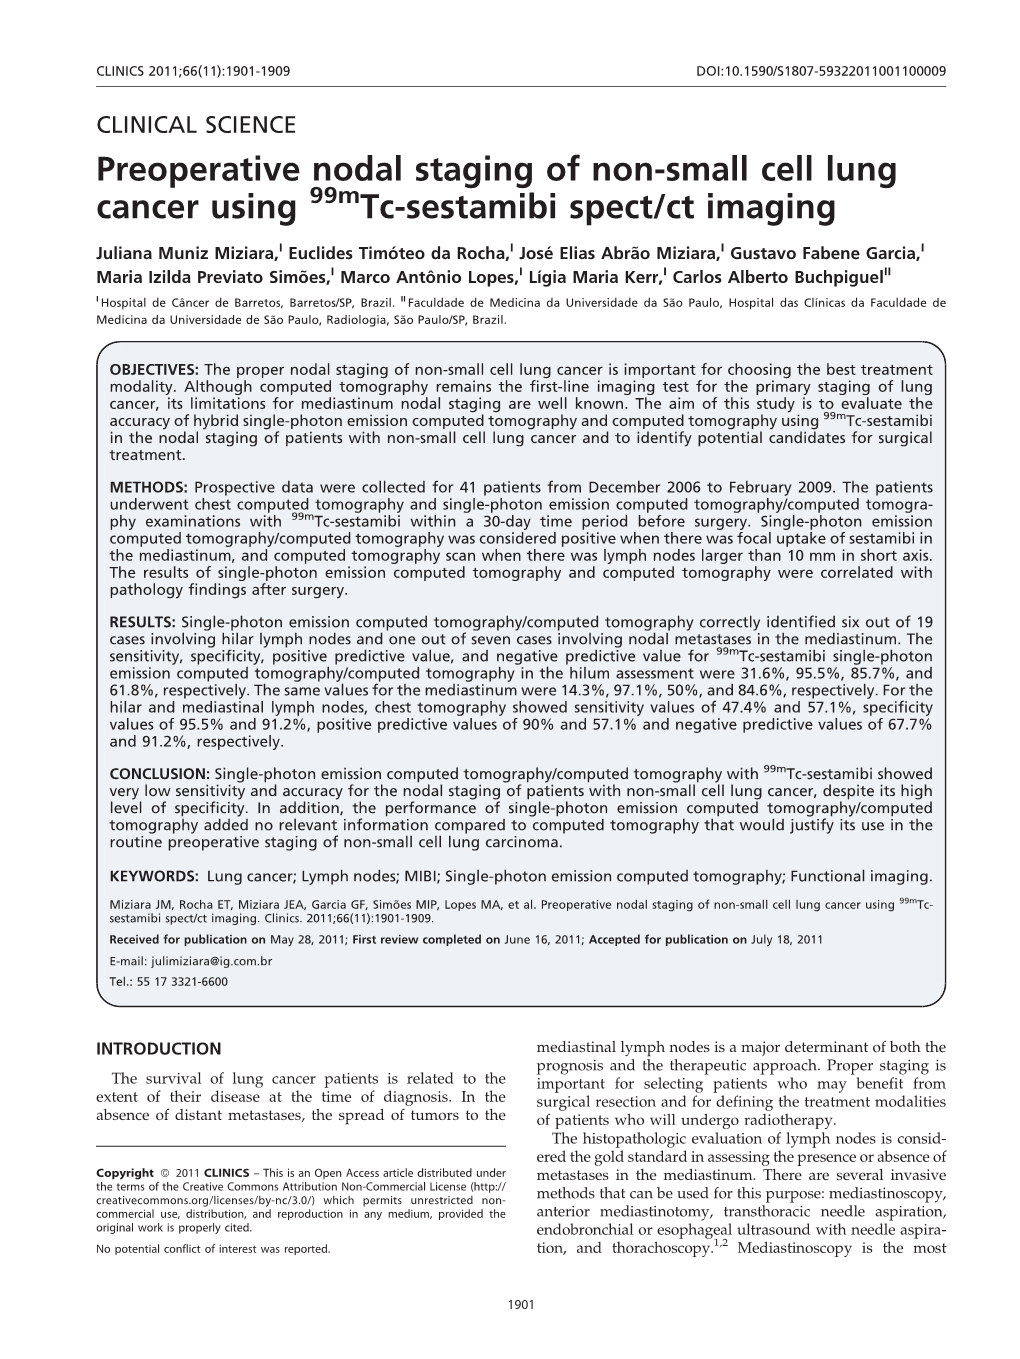 Preoperative Nodal Staging of Non-Small Cell Lung Cancer Using Tc